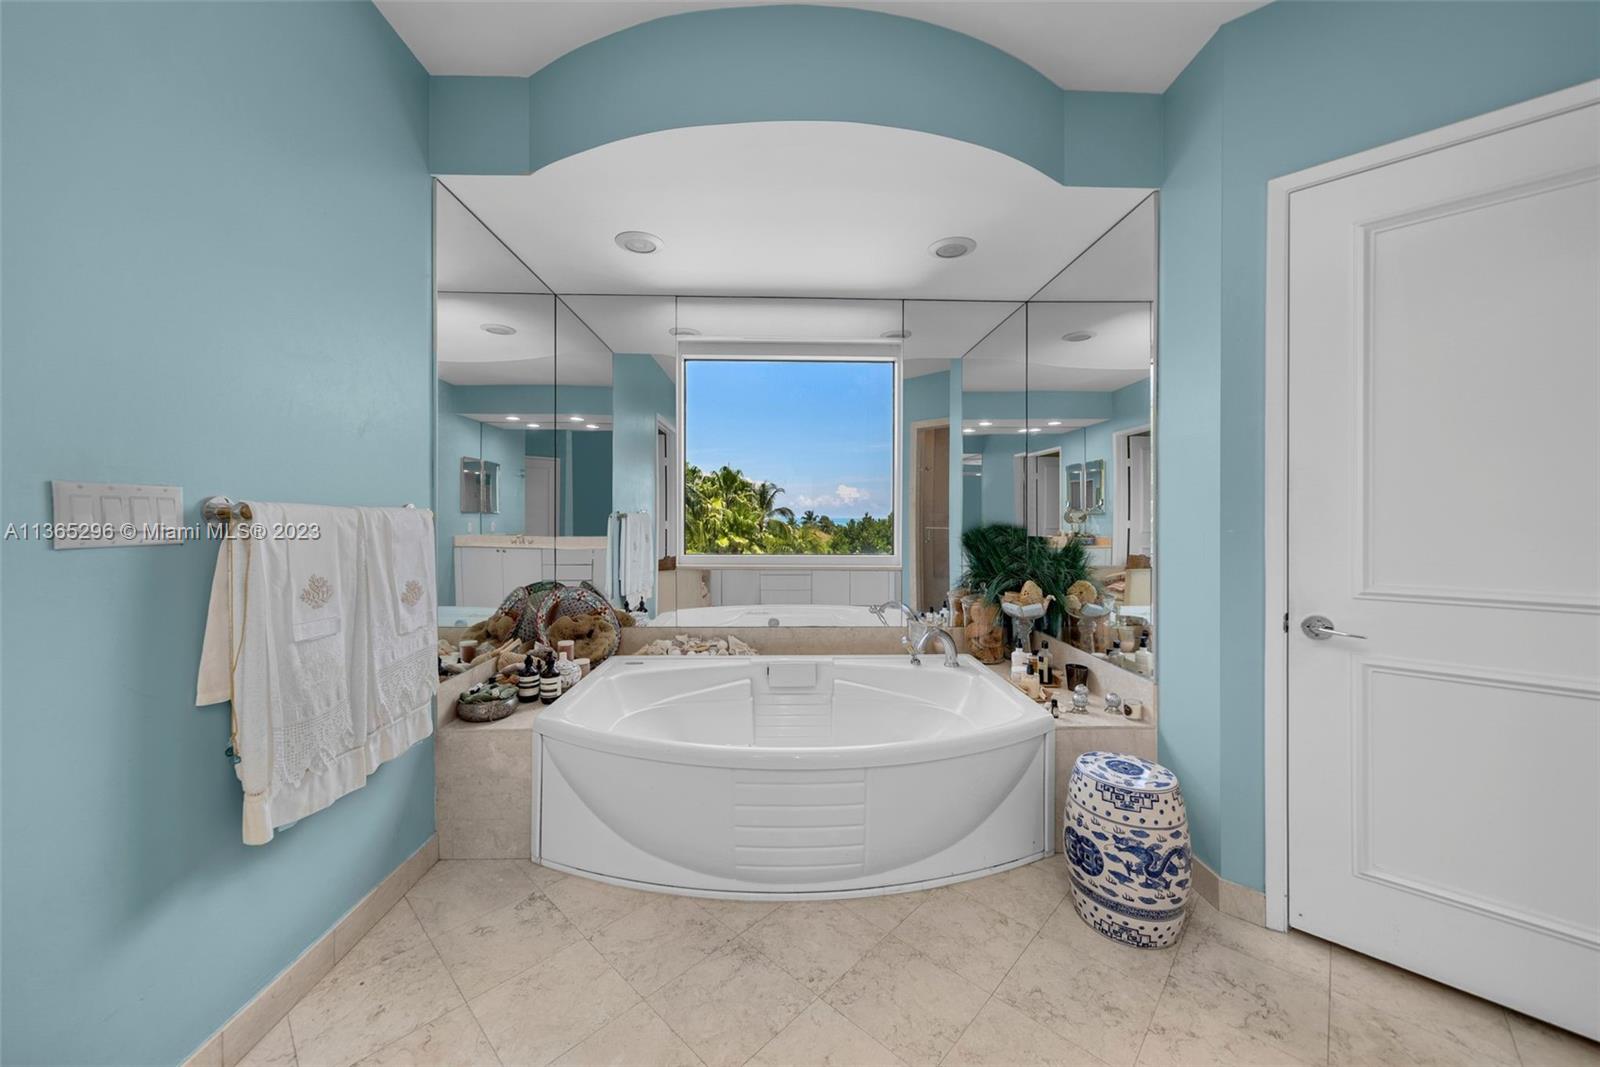 Master bath with separate shower and whirlpool tub.